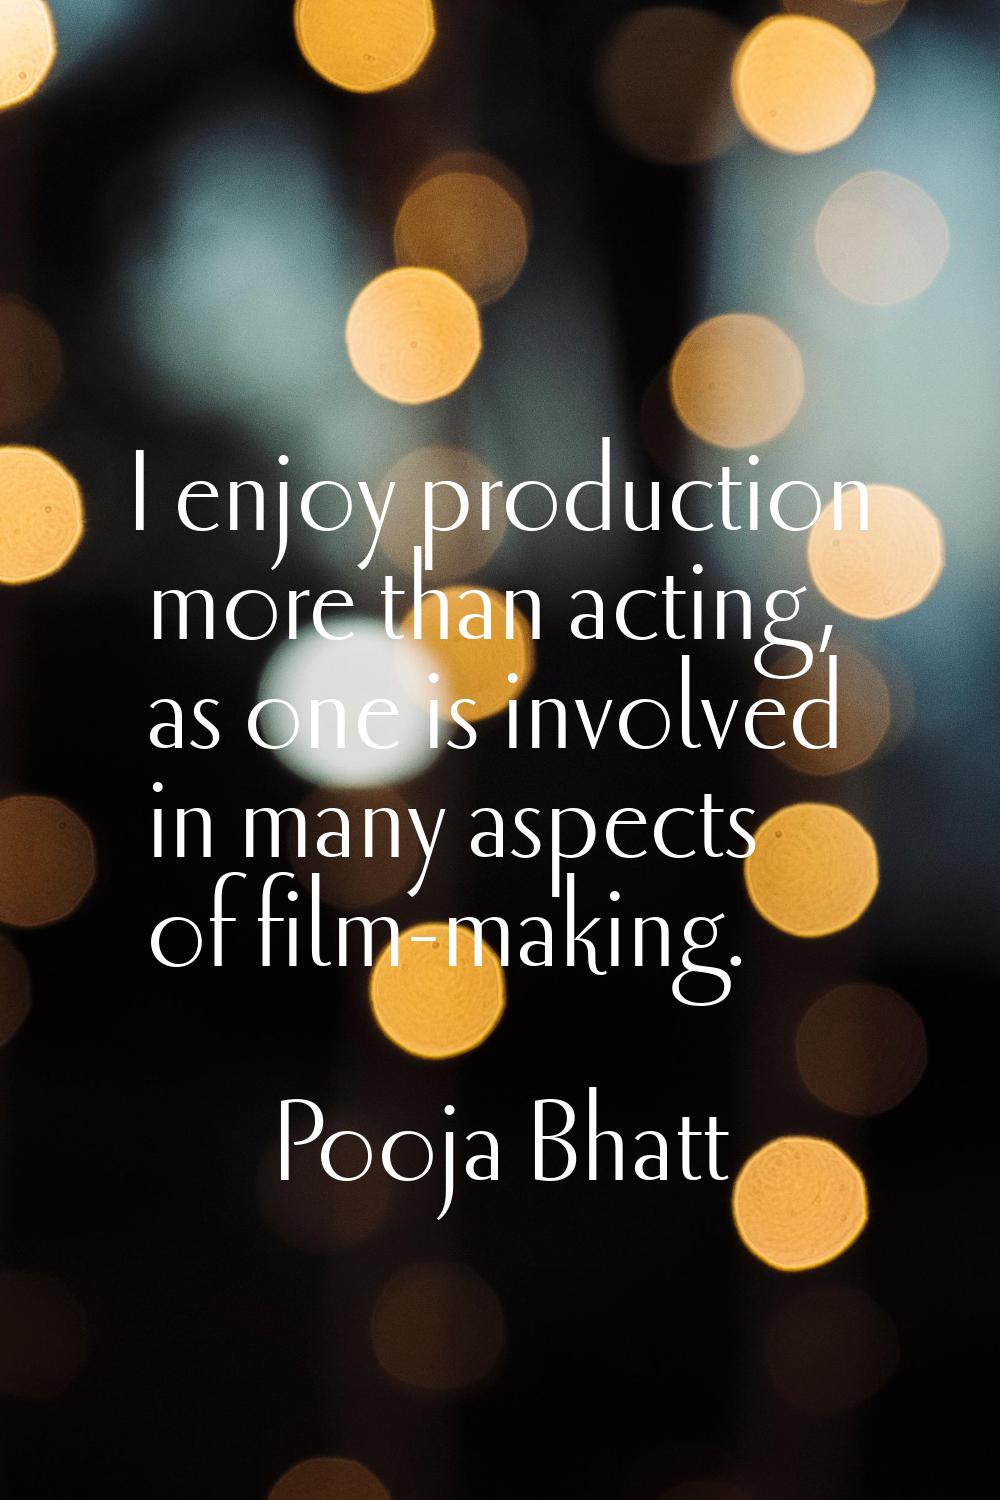 I enjoy production more than acting, as one is involved in many aspects of film-making.